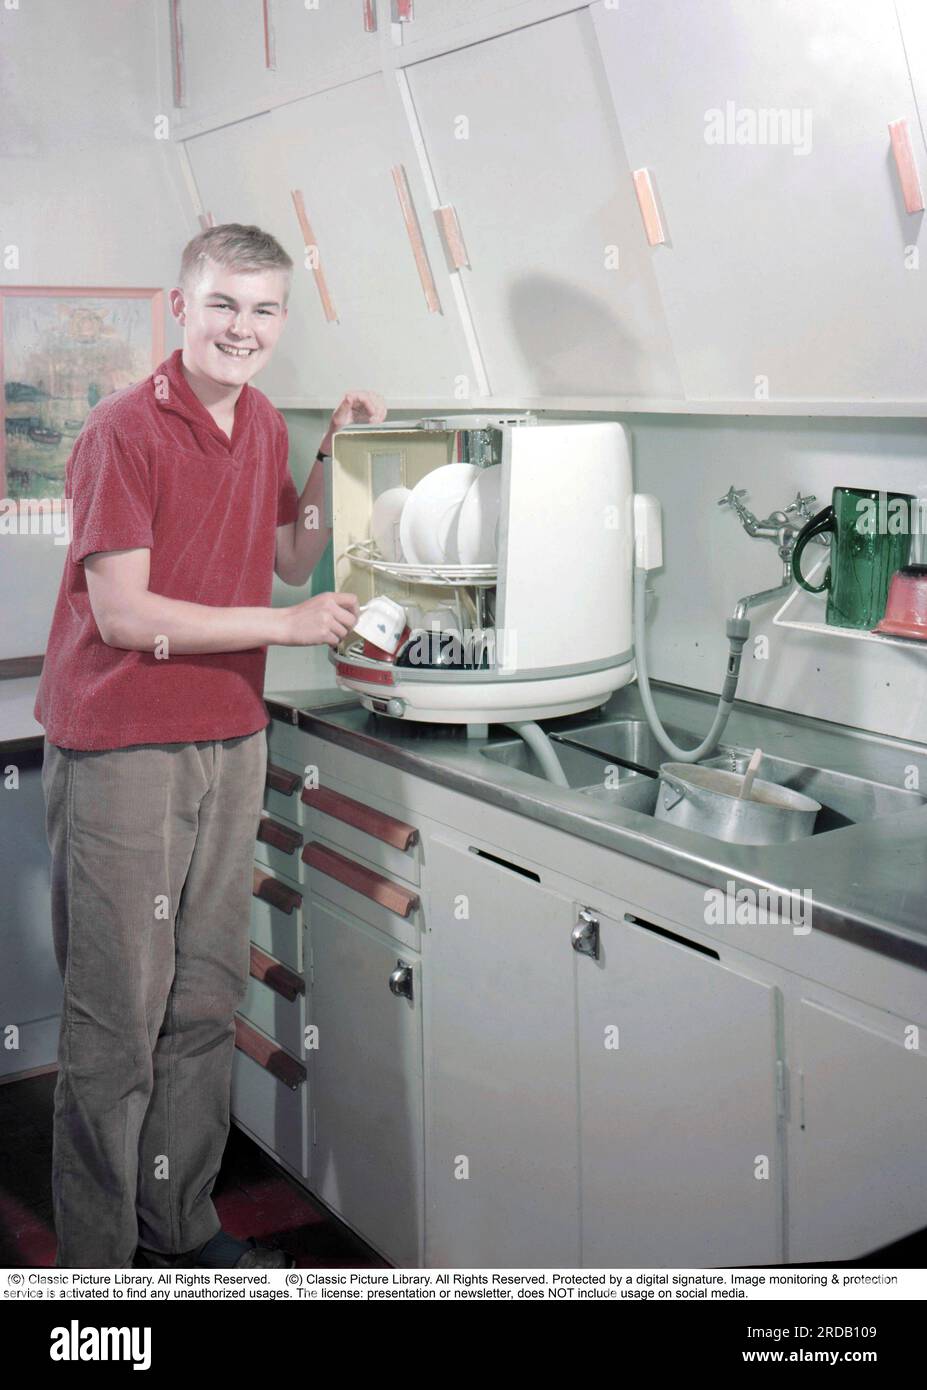 Kitchen in the past. A young man at the Swedish company Electrolux's first dishwasher, the bench dishwasher D10, called the Round jar or round can, which began production in 1959, and then cost SEK 410 plus VAT. The dishwasher was in production until 1973 and was produced in 50,000 copies. The big difference to modern dishwashers was that the string baskets with the dirty plates and glasses rotated inside and was washed clean by stationary jets of water. Sweden 1959. Conard Stock Photo